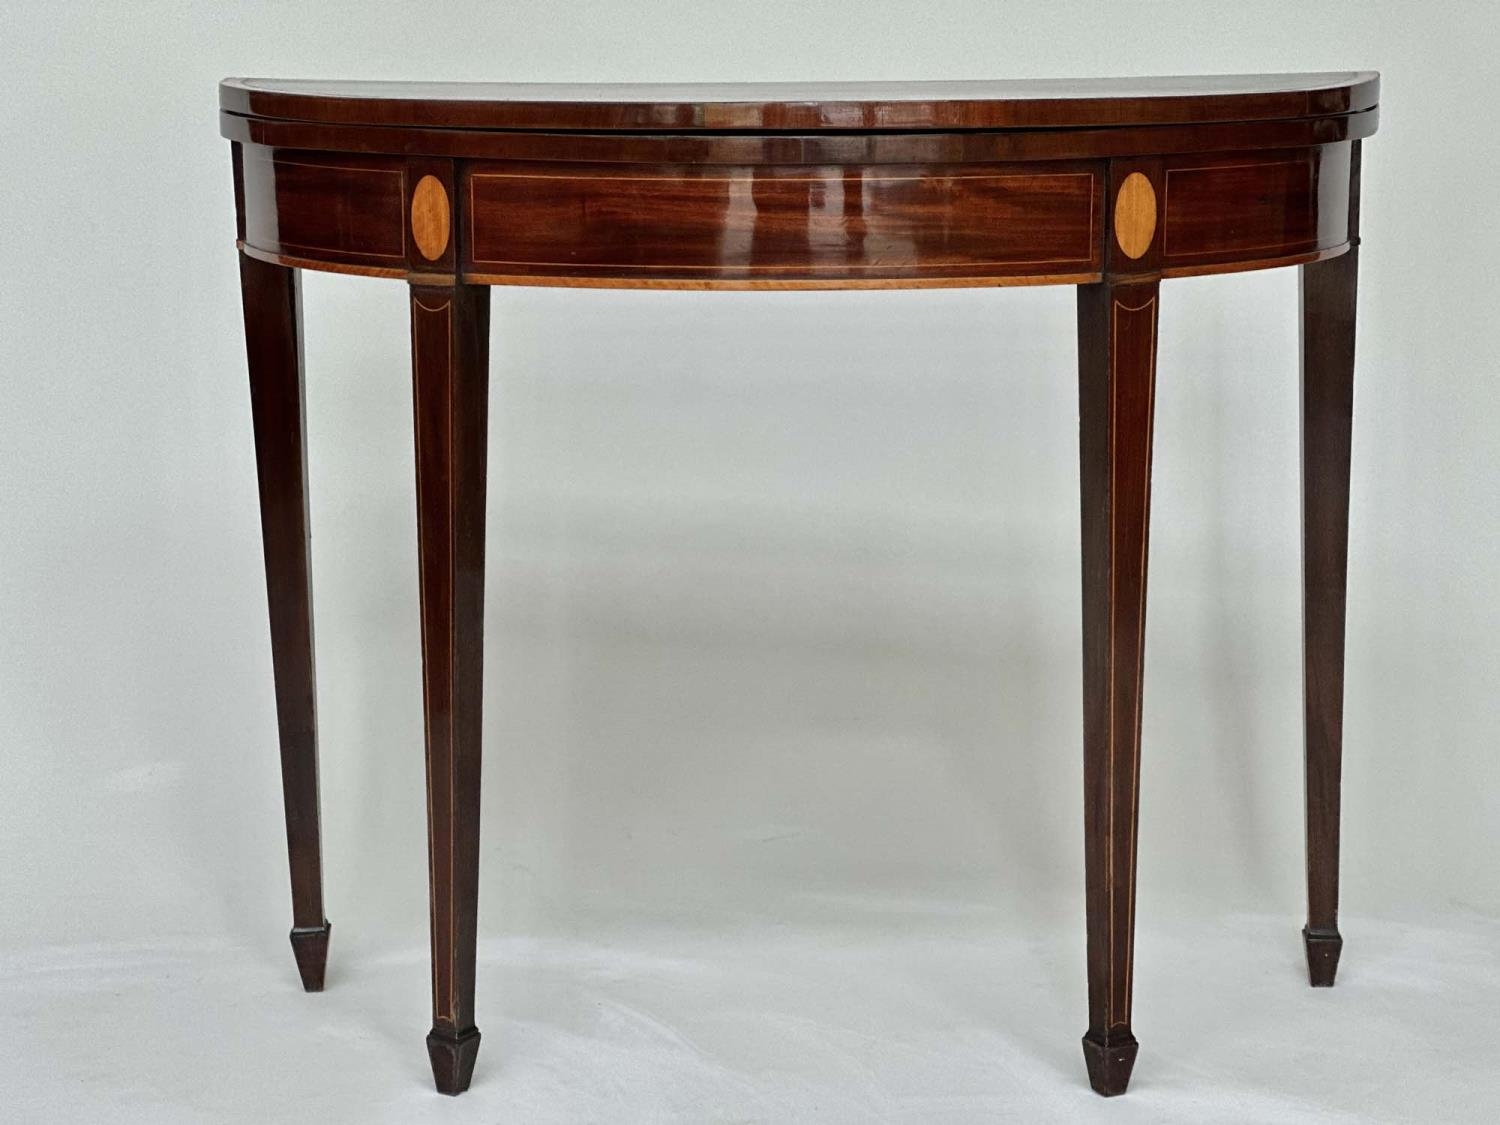 CARD TABLE, George III flame mahogany and satinwood crossbanded, demilune foldover baise lined, 90cm - Image 2 of 12